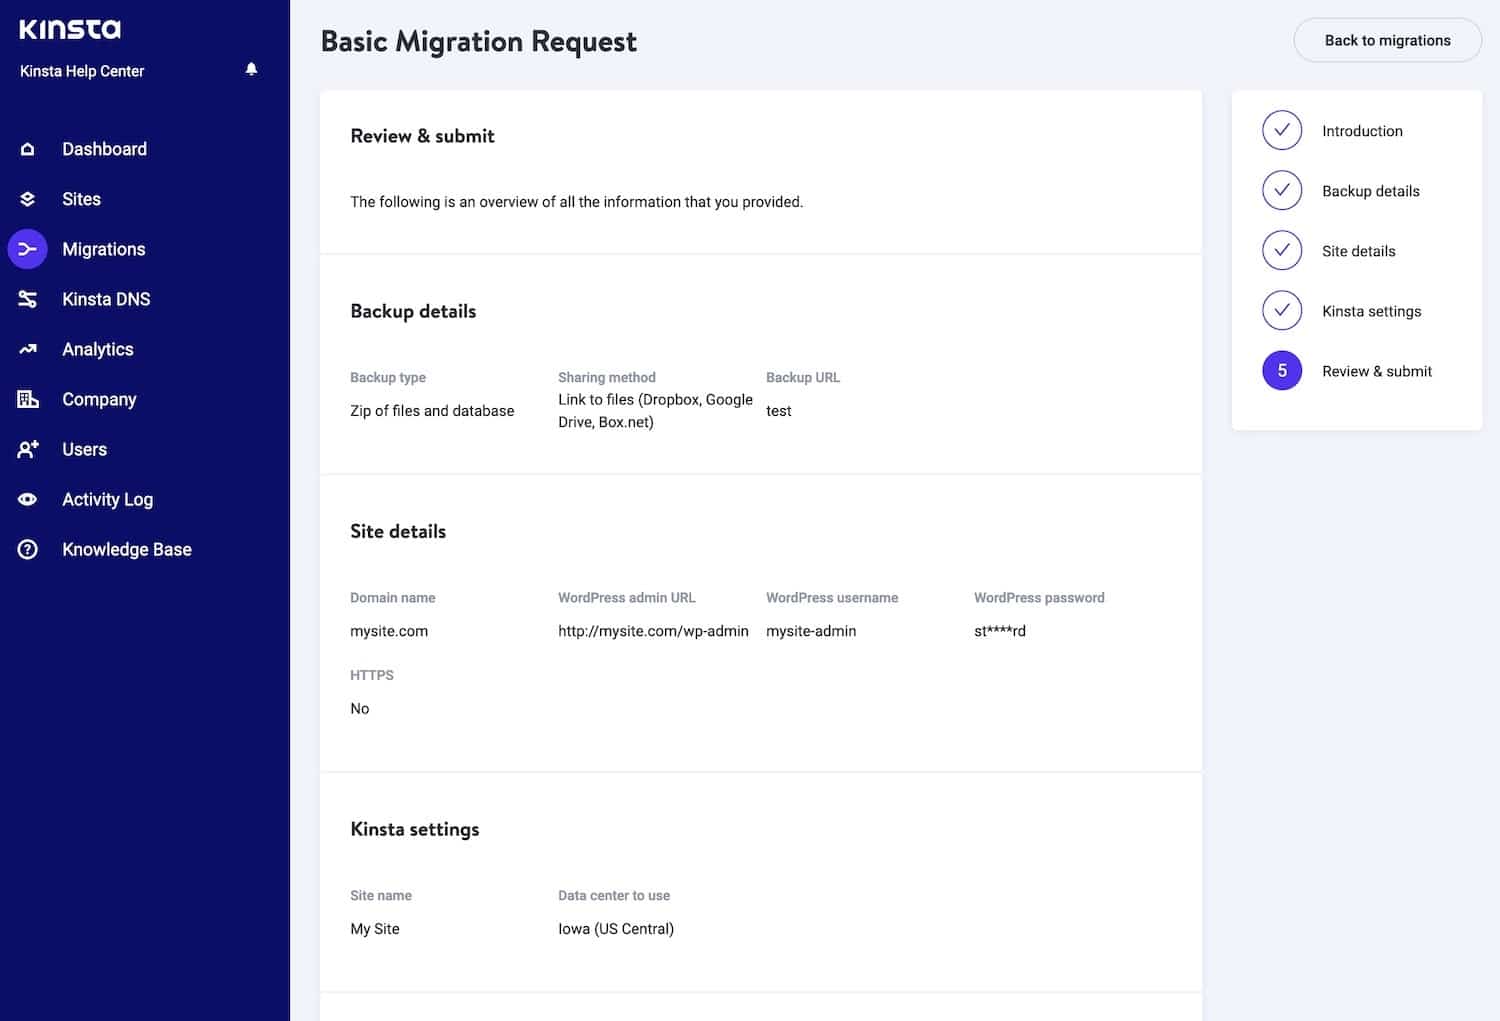 Summary of the migration request details.